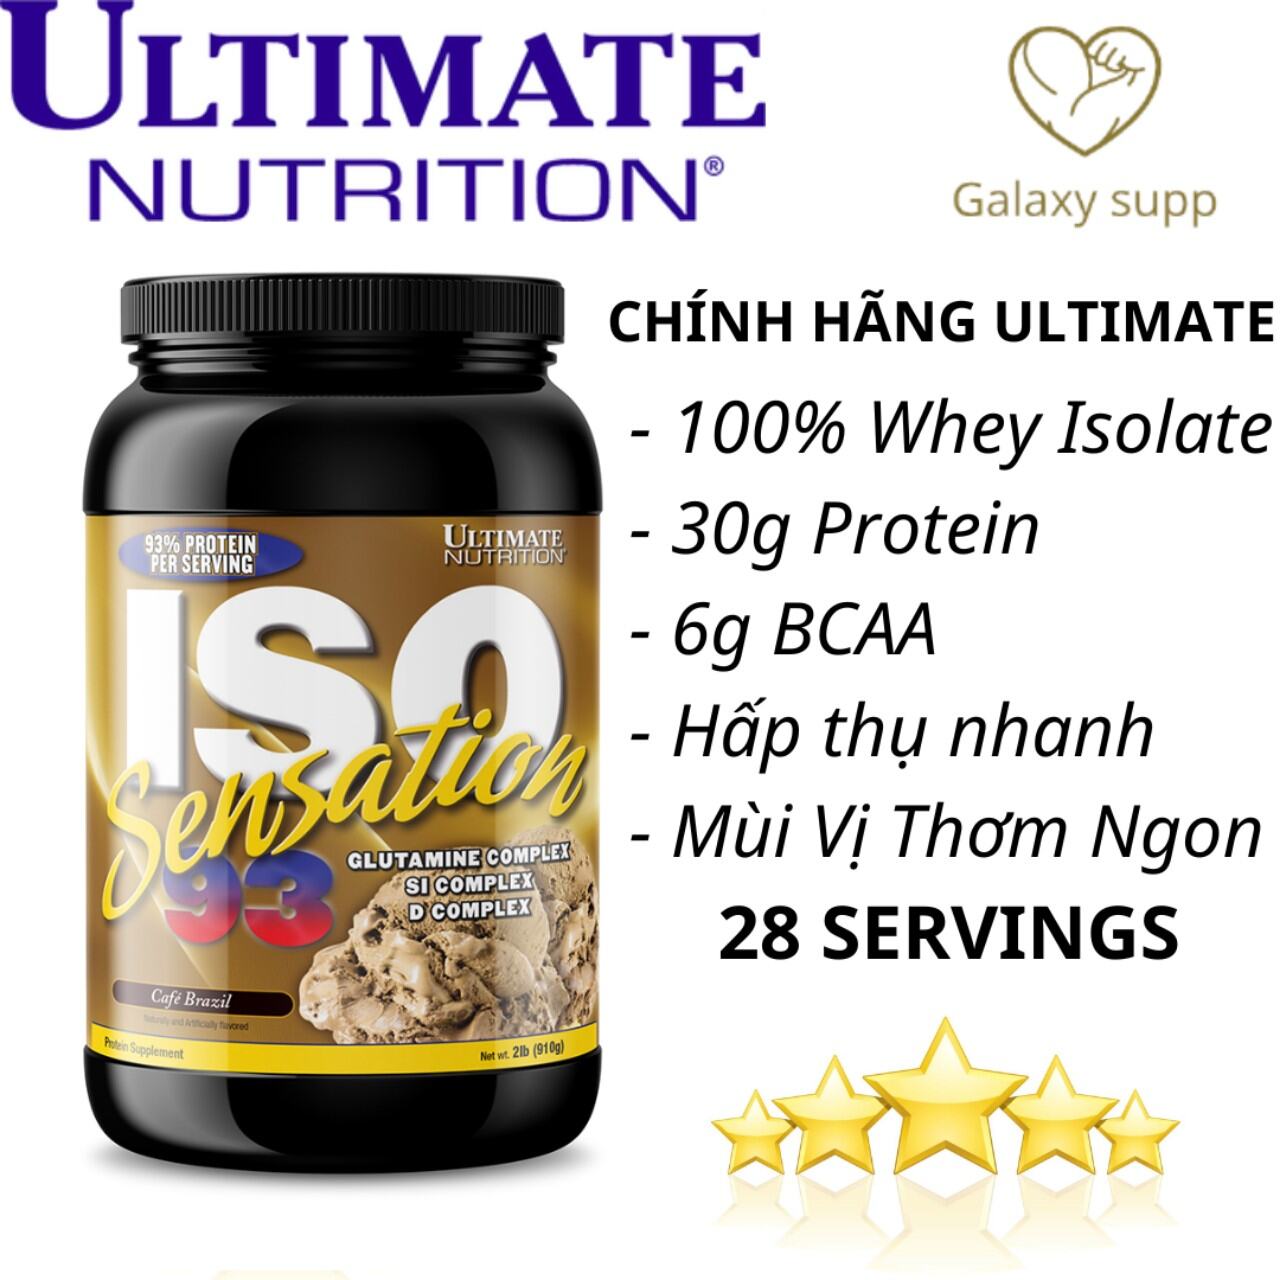 Ultimate Nutrition Whey Protein - Sữa Tăng Cơ ISO Sensation 93 3.5lbs